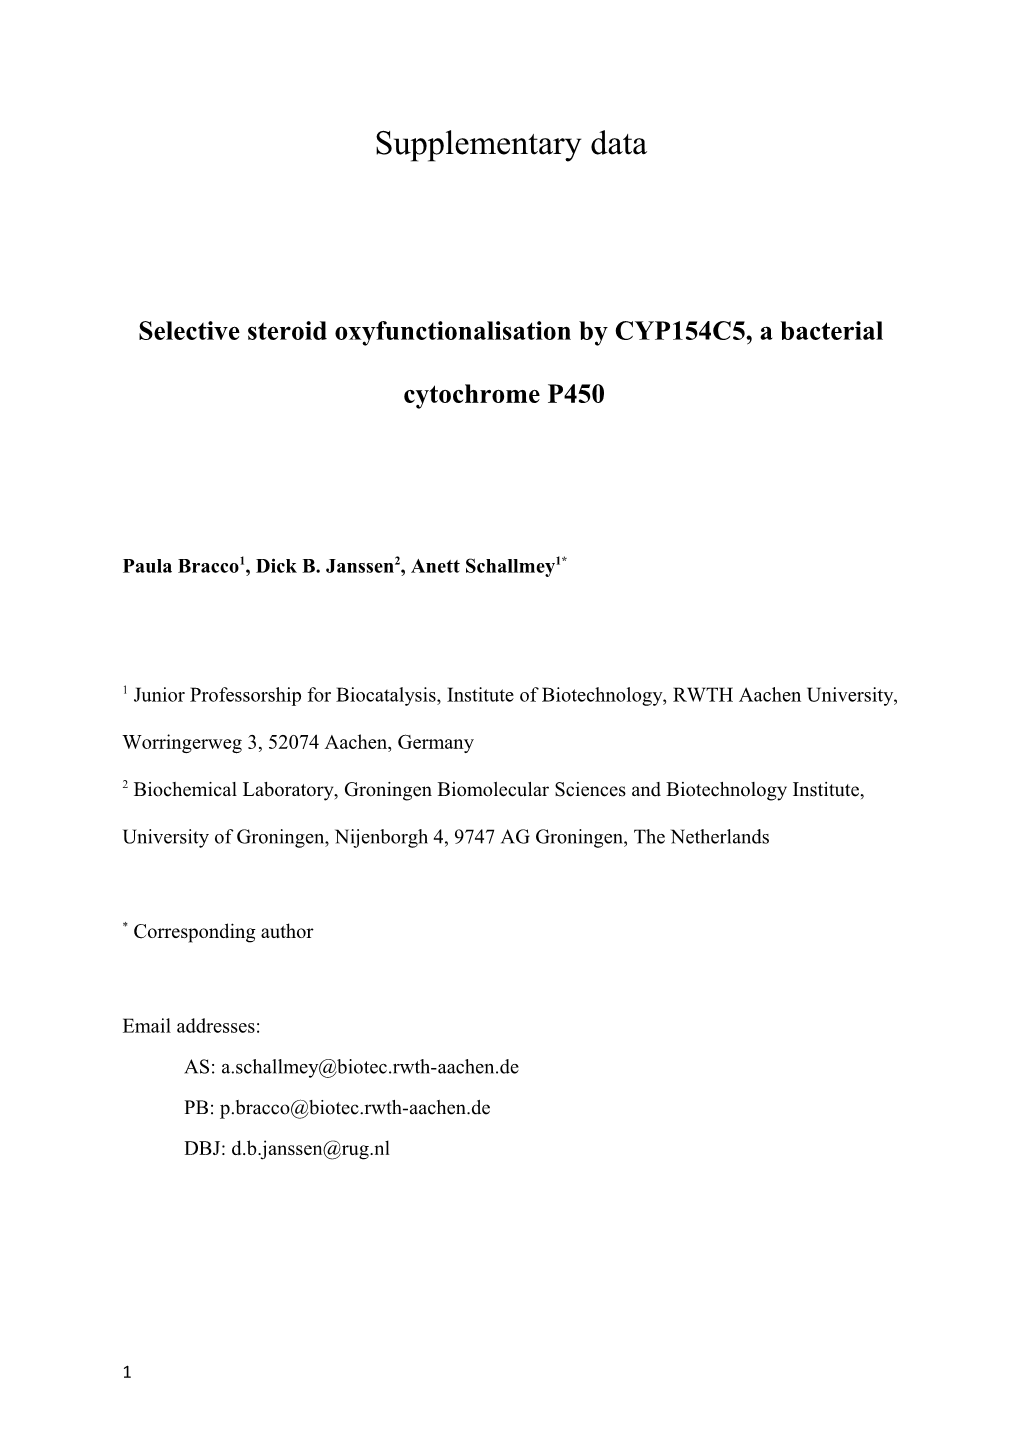 Selective Steroid Oxyfunctionalisation by CYP154C5, a Bacterial Cytochrome P450